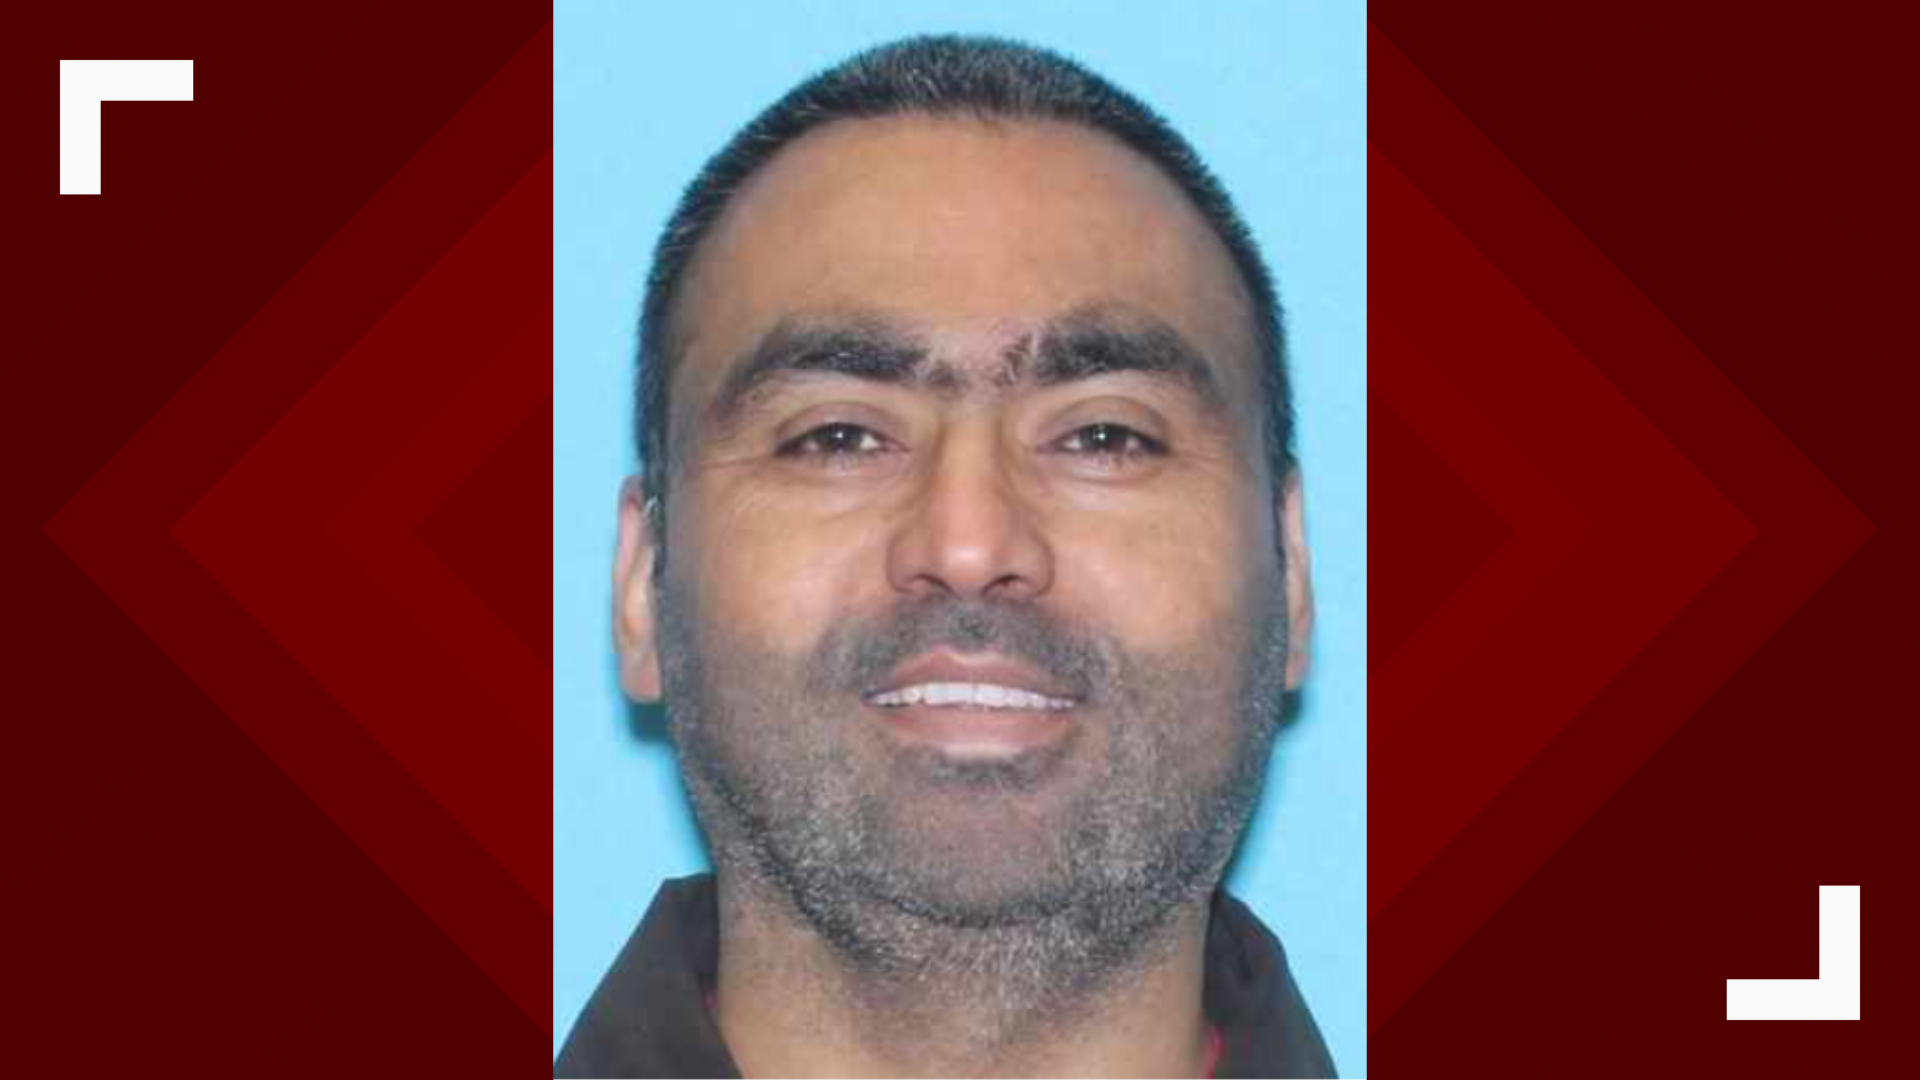 Mandeep Singh's body was found not far from the place where he sat a car on fire with two passengers inside in rural Cooke County.